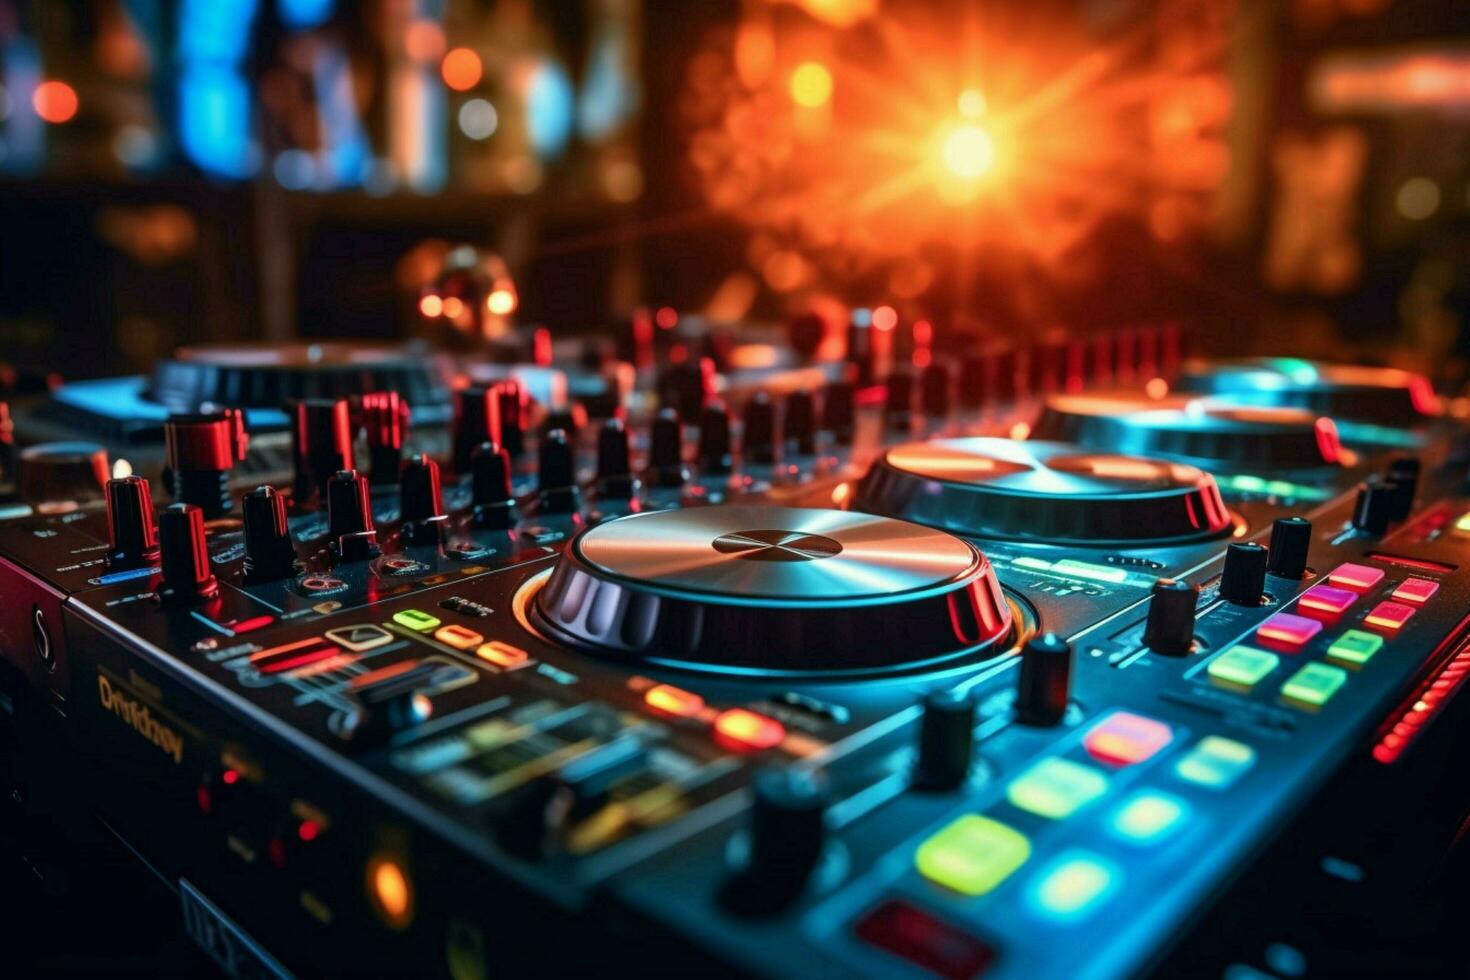 dj equipment in a club with a blurred background photo